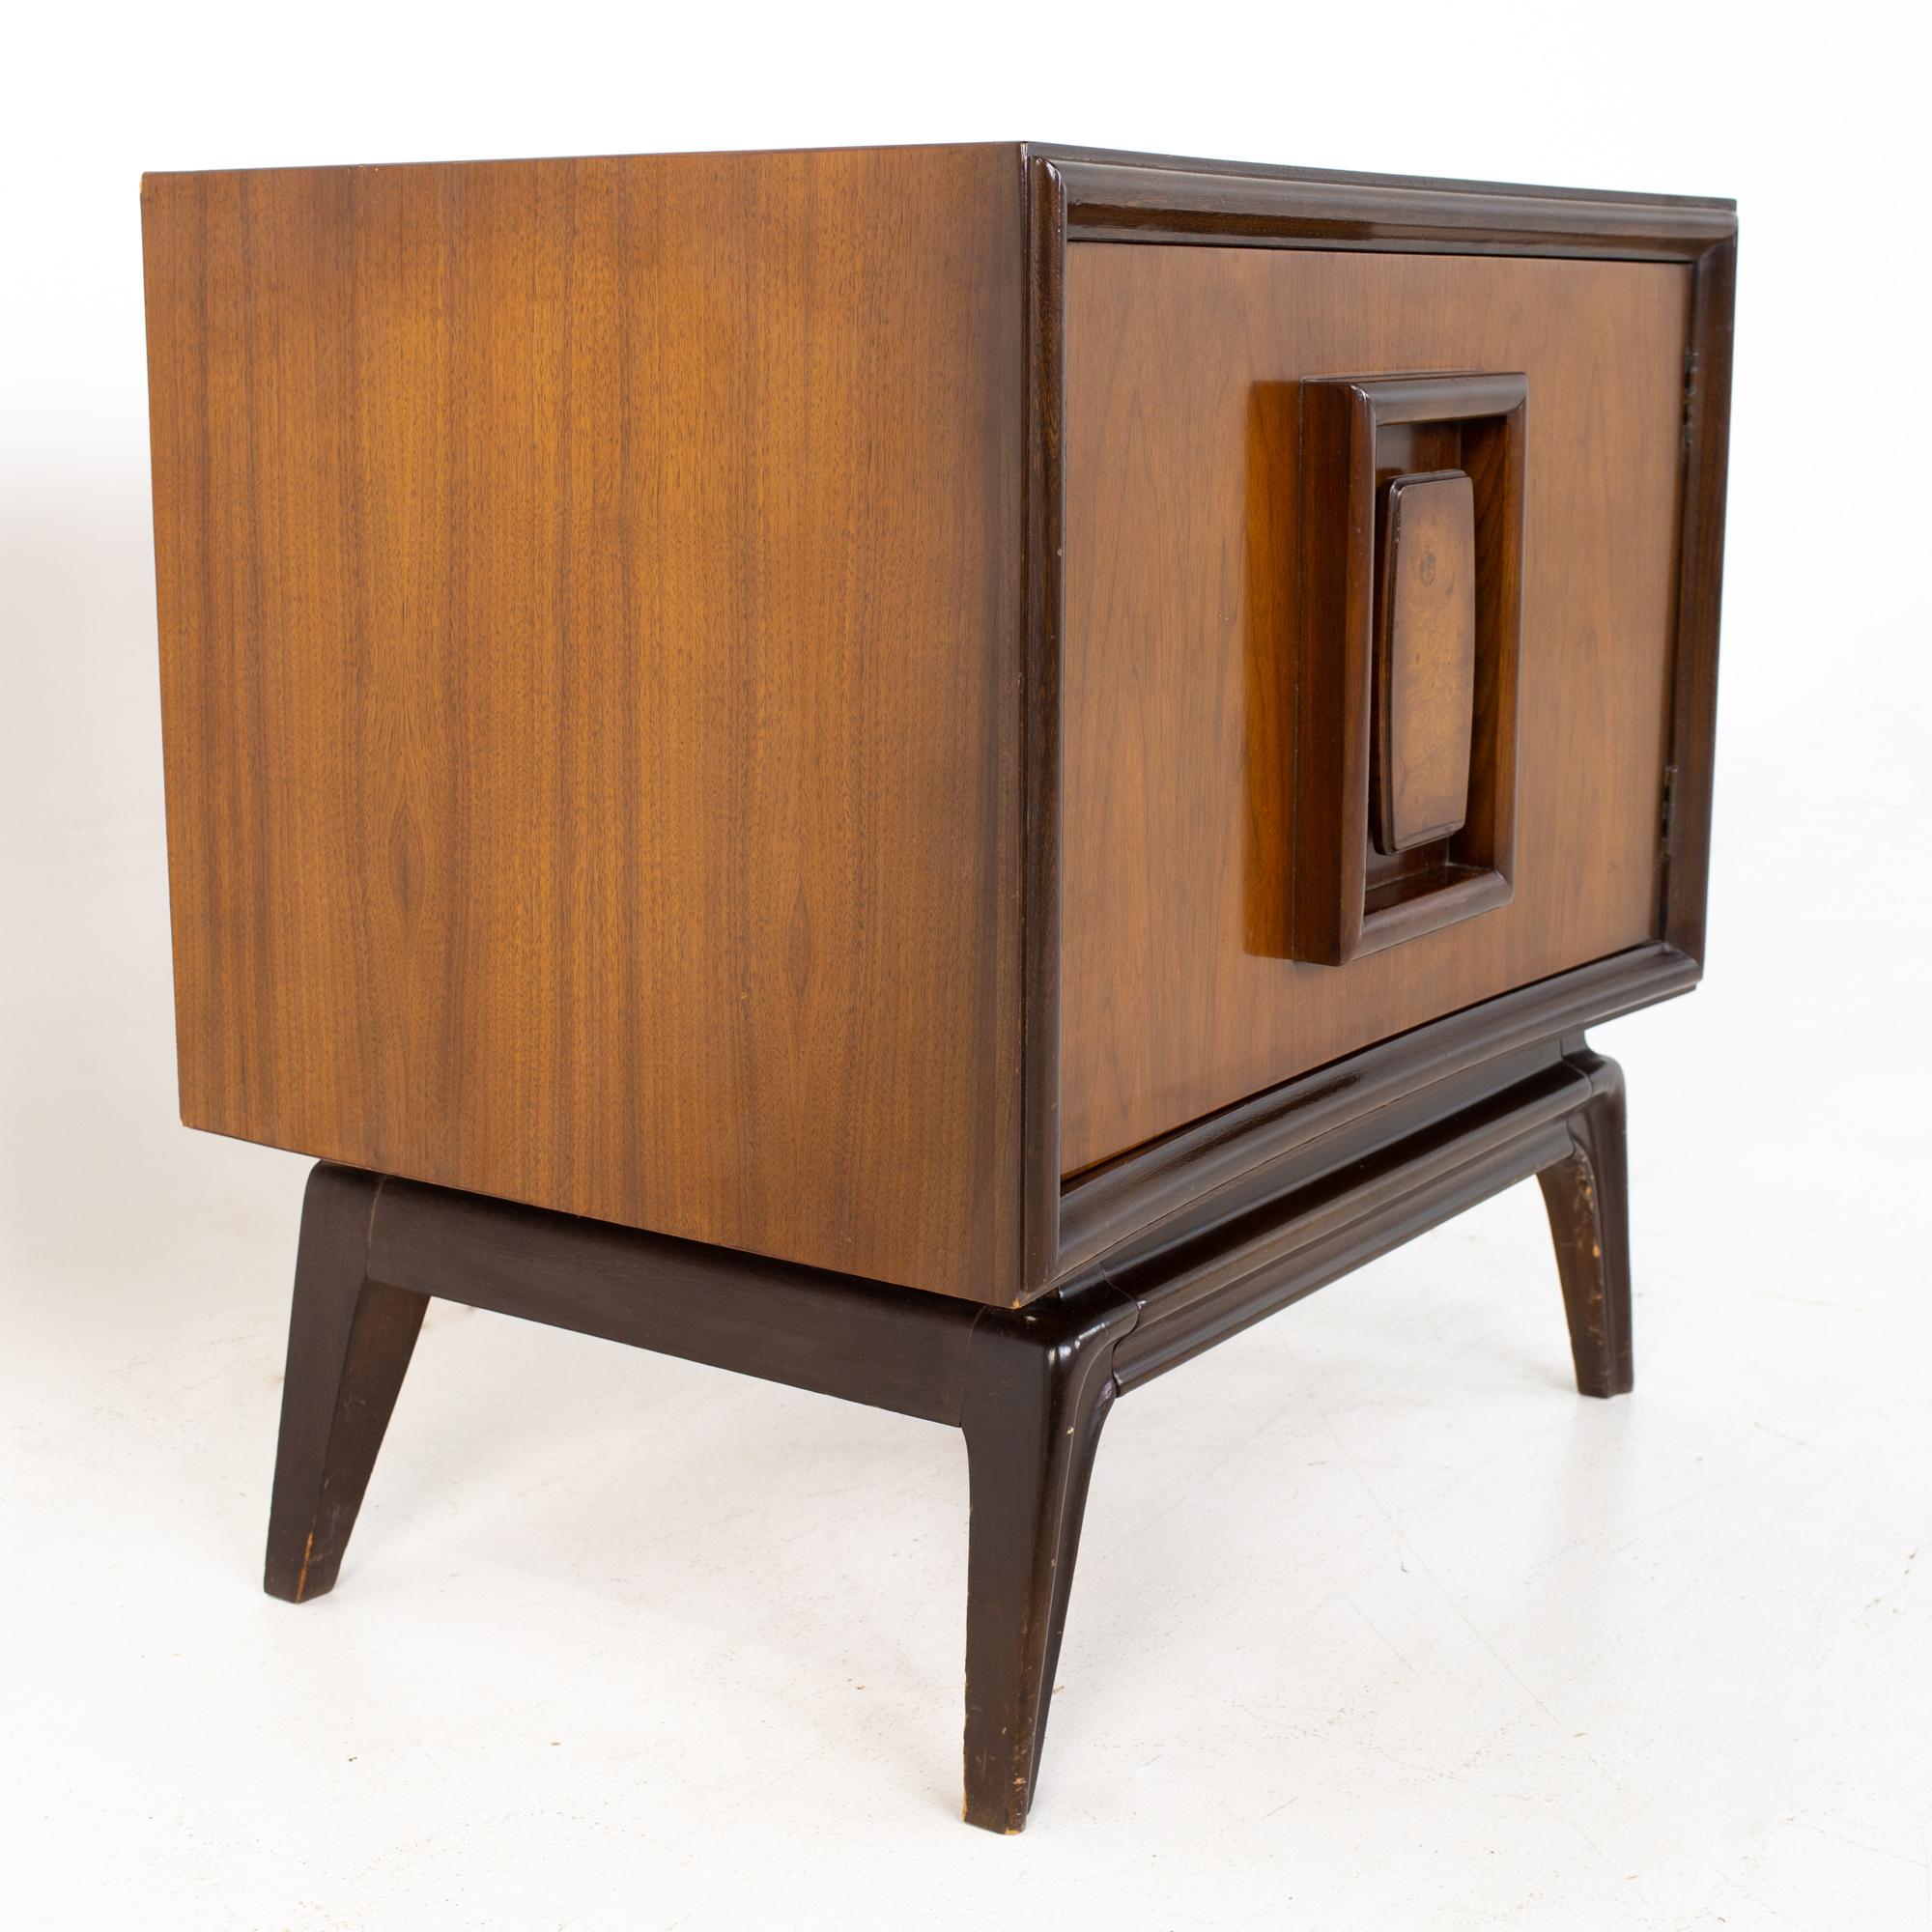 Late 20th Century Hoke Wood Products Mid Century Walnut and Burlwood Nightstands, a Pair